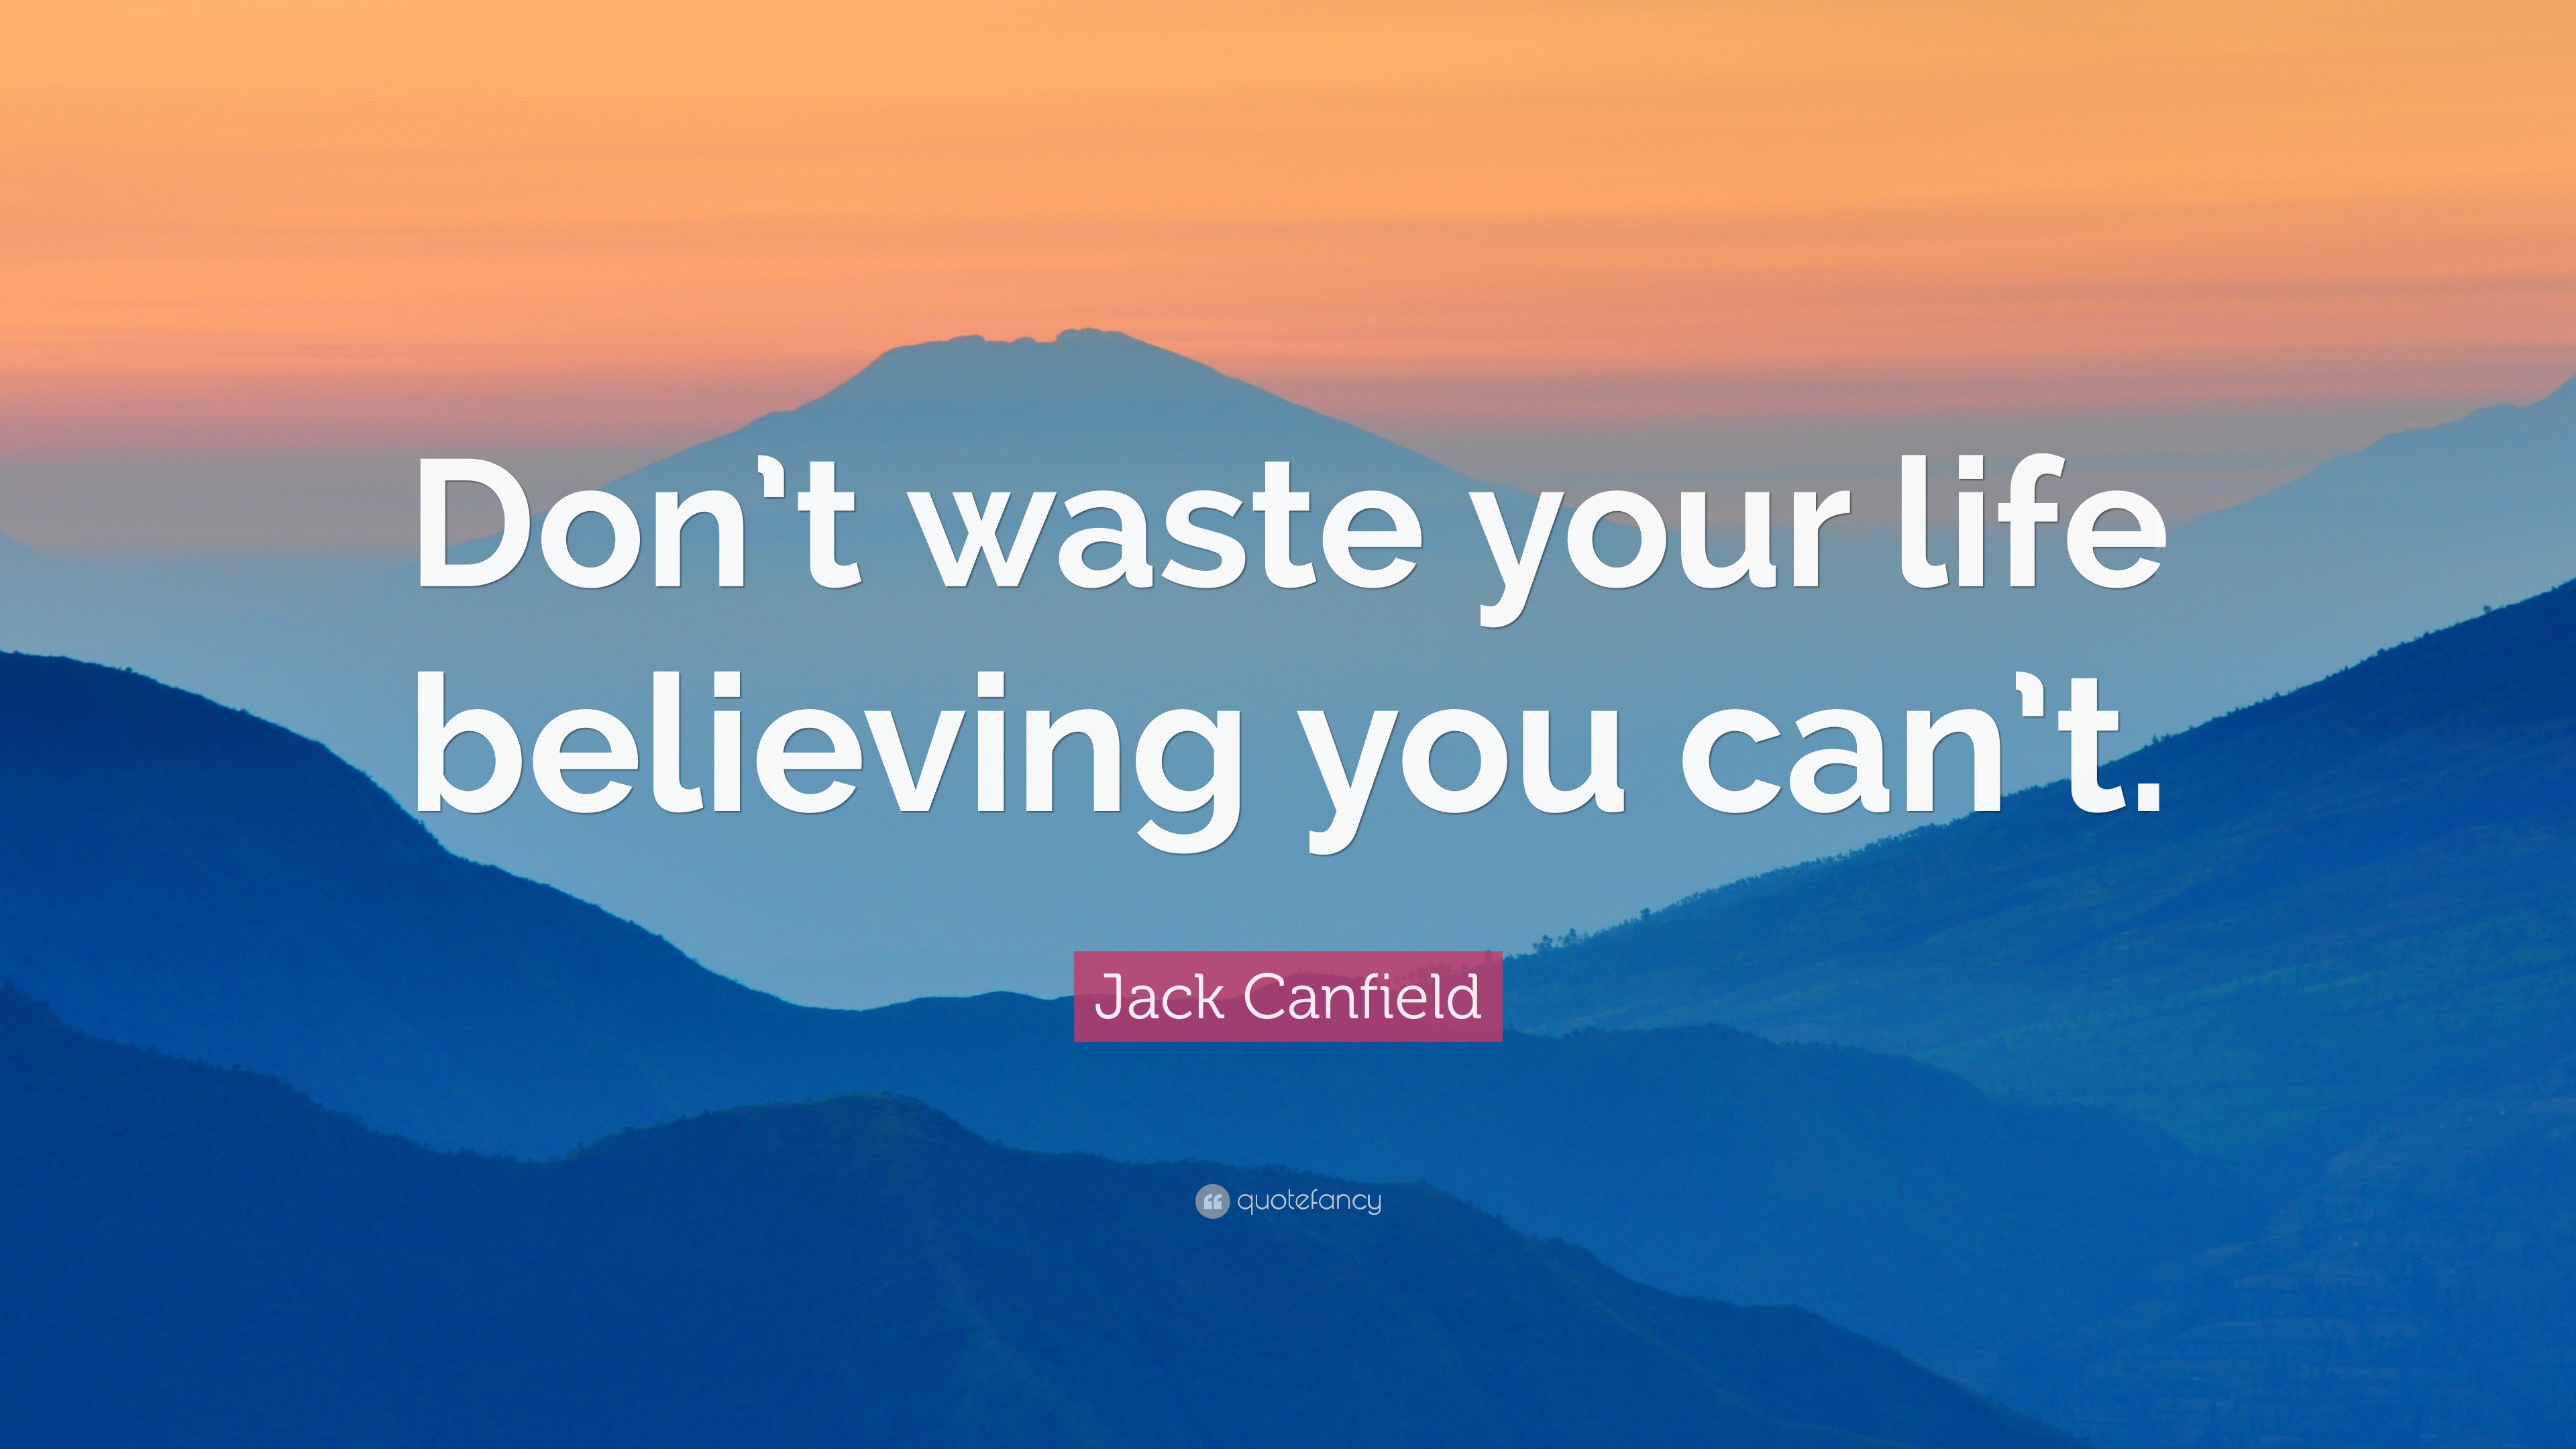 Jack Canfield Quote “Don t waste your life believing you can t